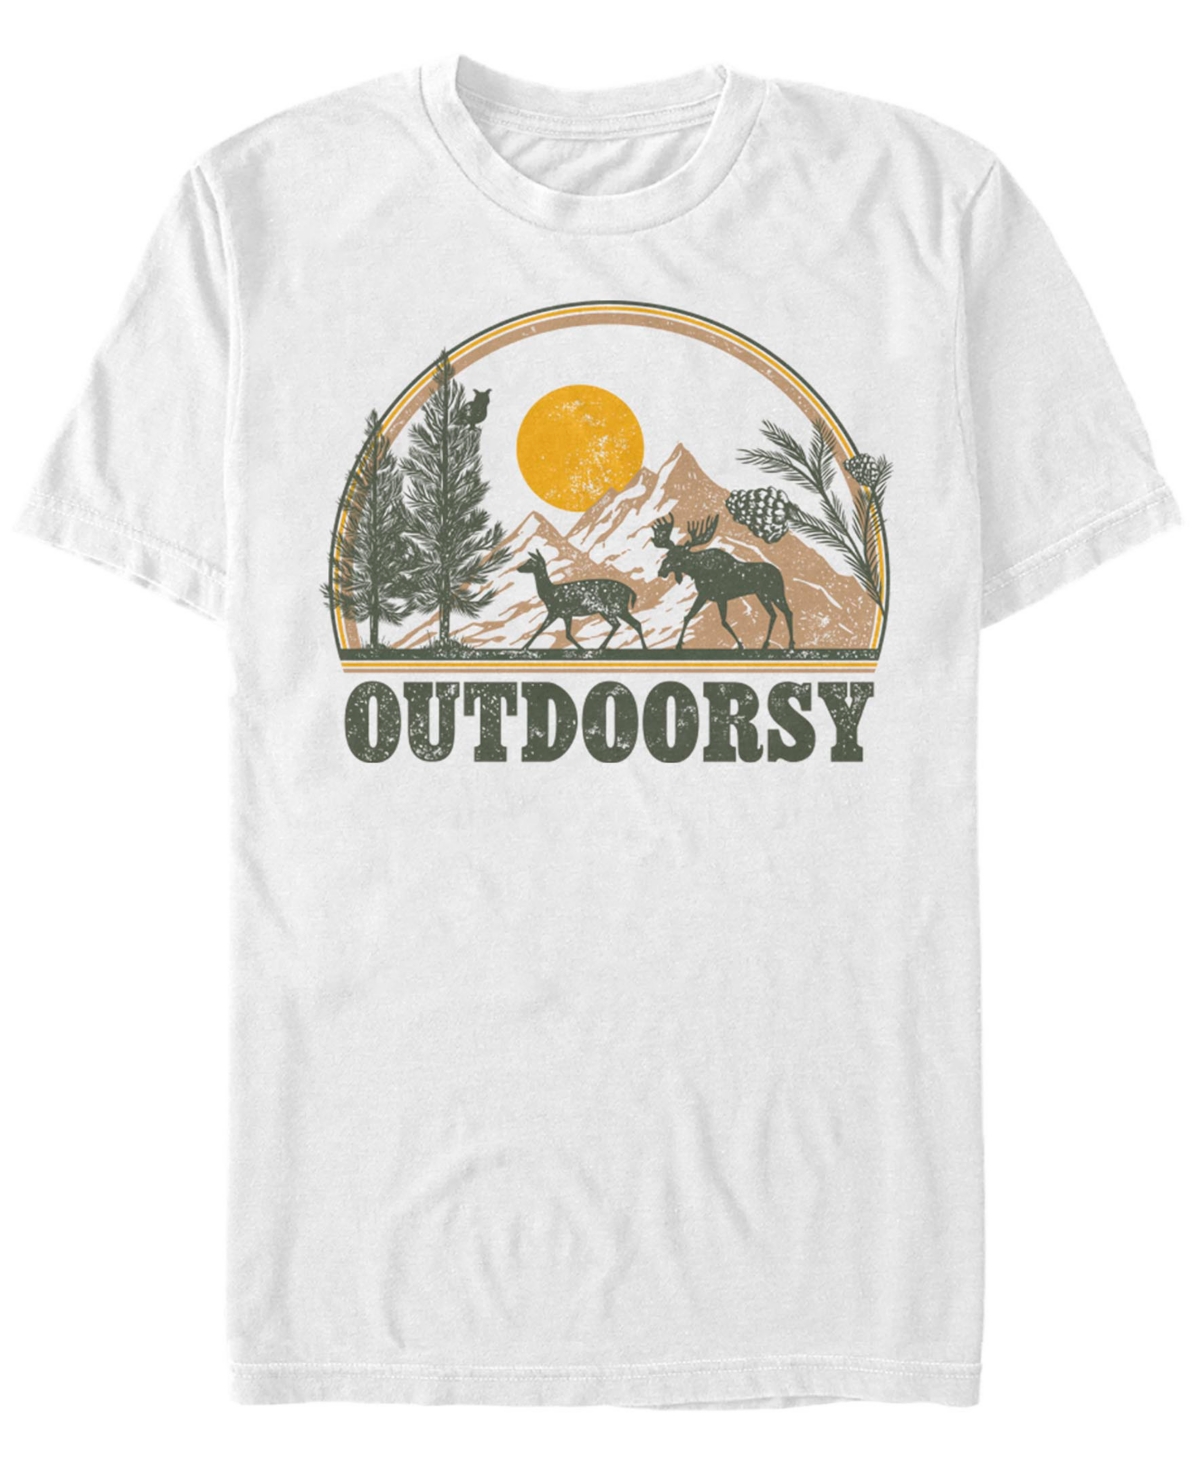 Fifth Sun Men's Outdoorsy Short Sleeves T-shirt In White